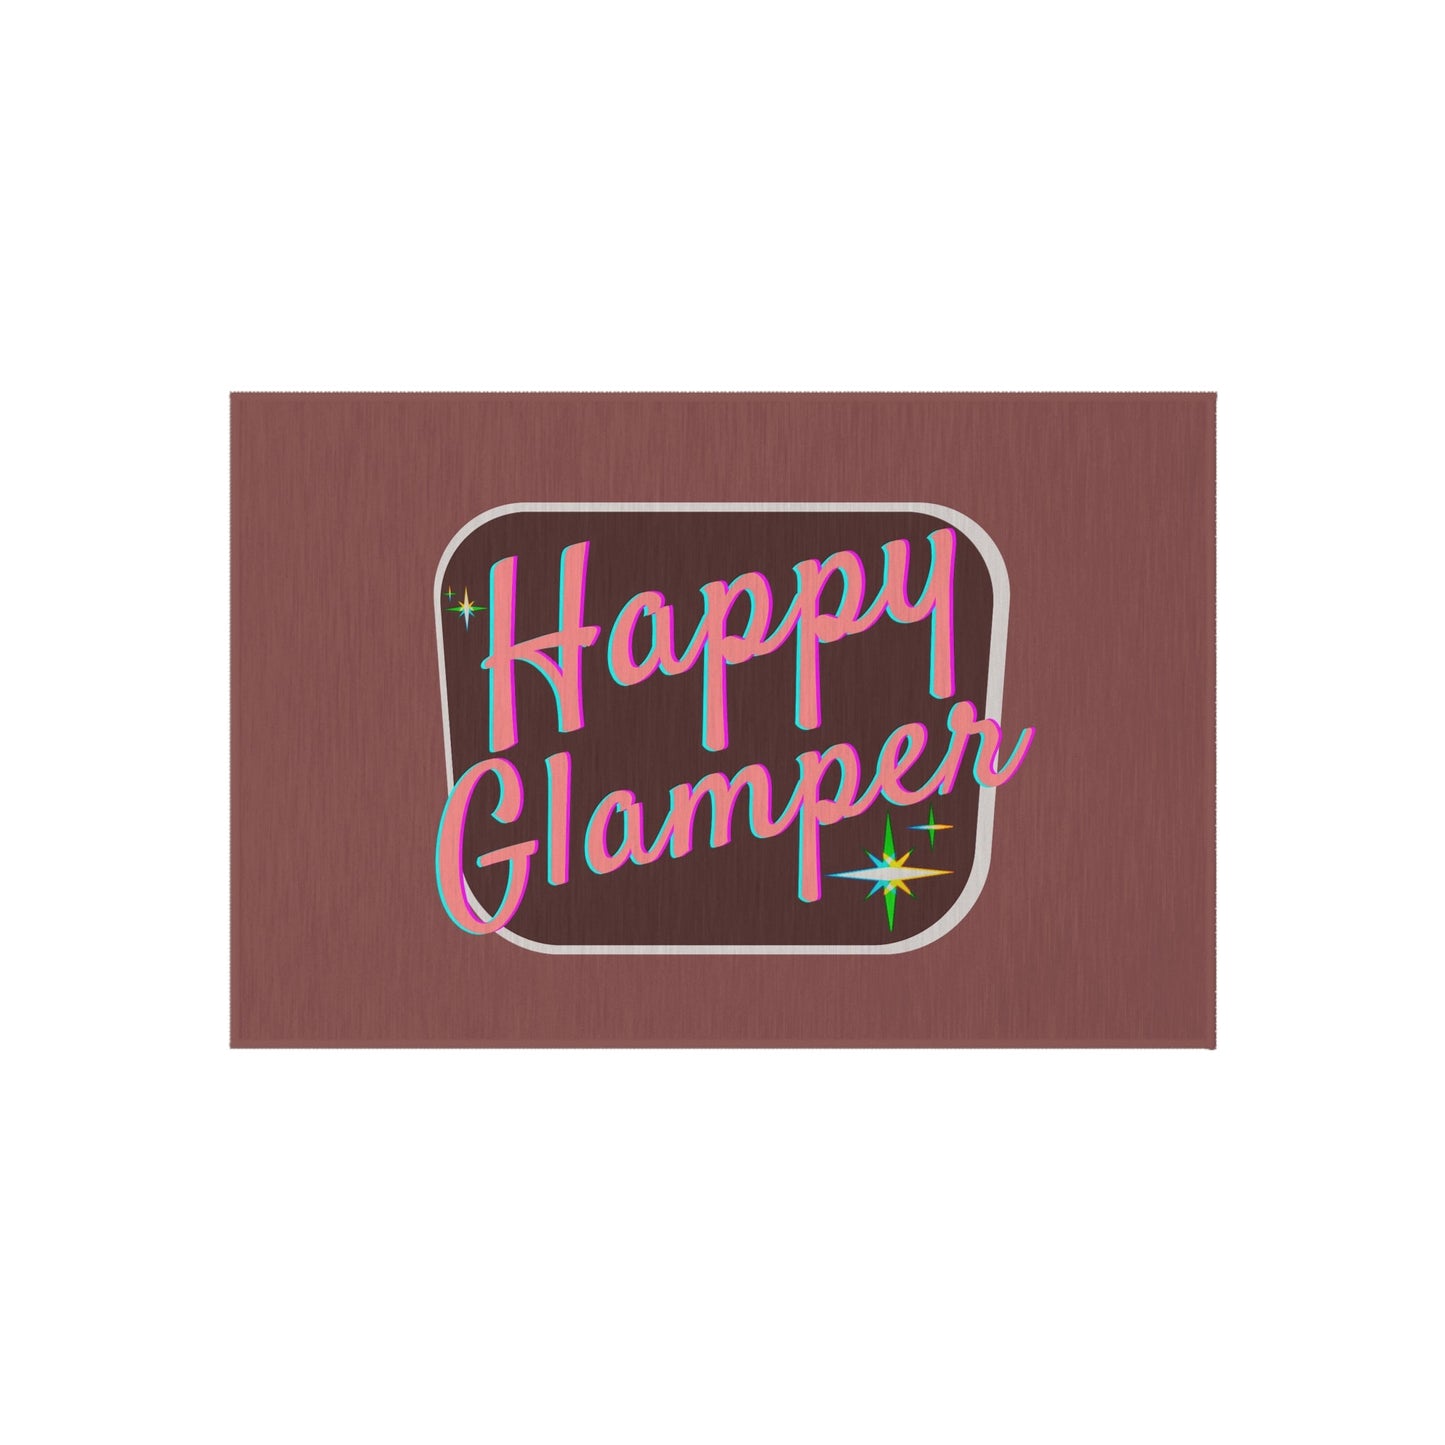 Pink Rug - Happy Glamping Rug for Your Camper Van, Tent, or RV